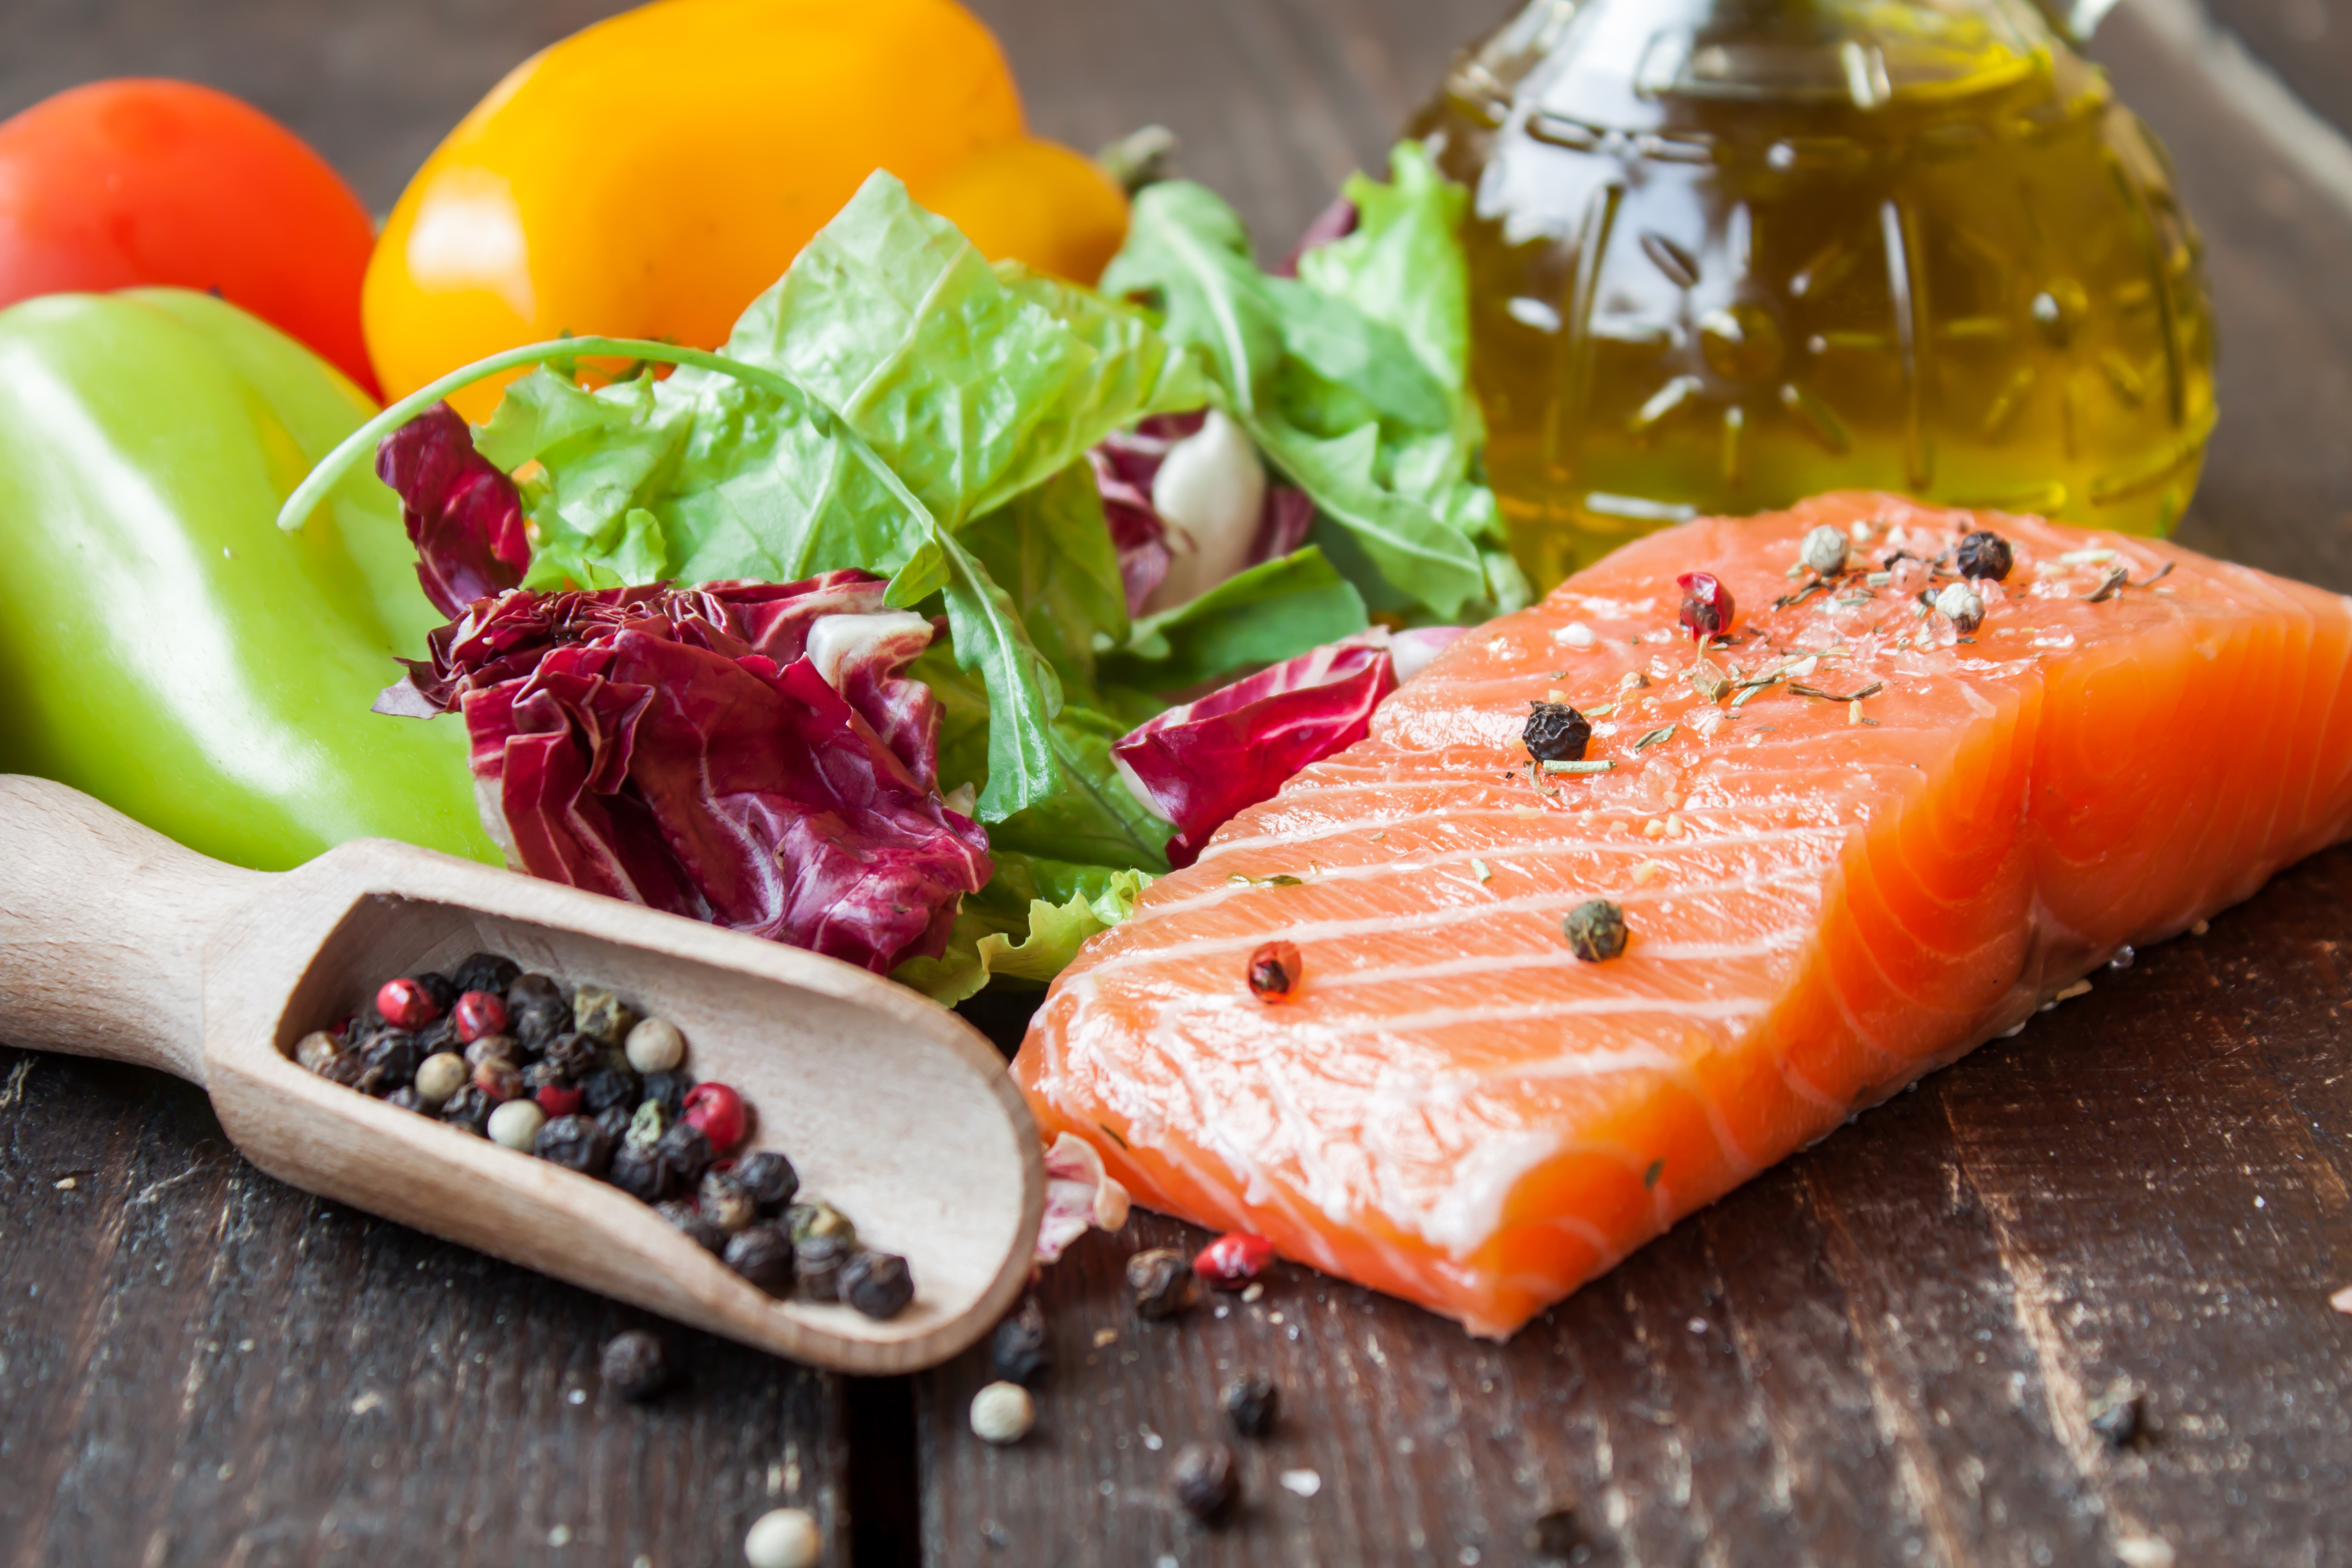 The longevity diet: What to eat to live longer, healthier, and have the ideal weight